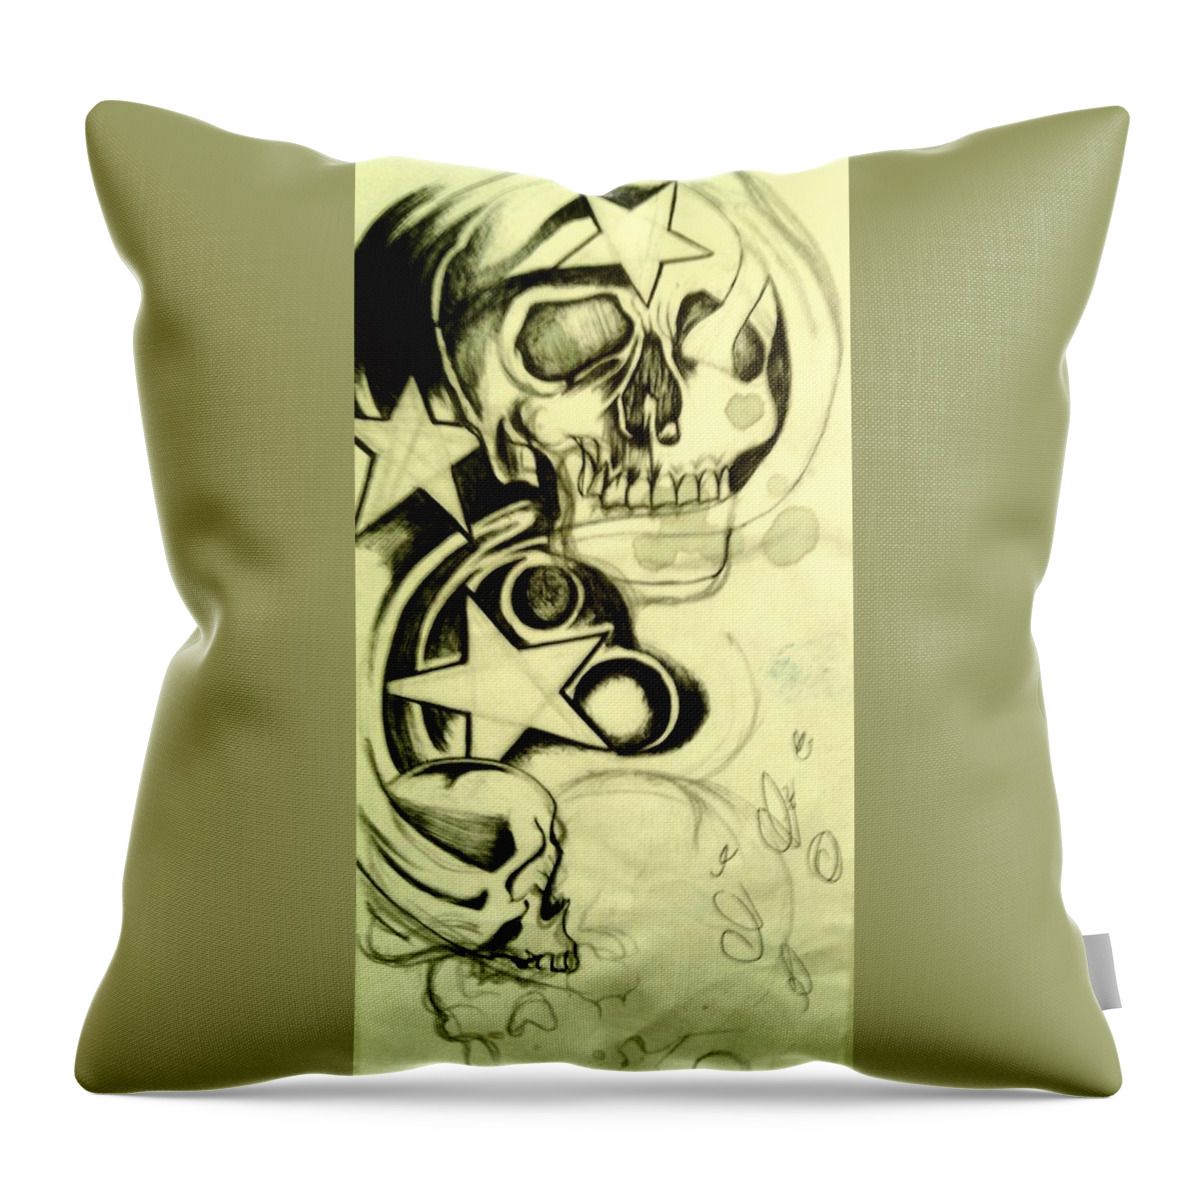 Black Art Throw Pillow featuring the drawing Untitled 10 by A S 